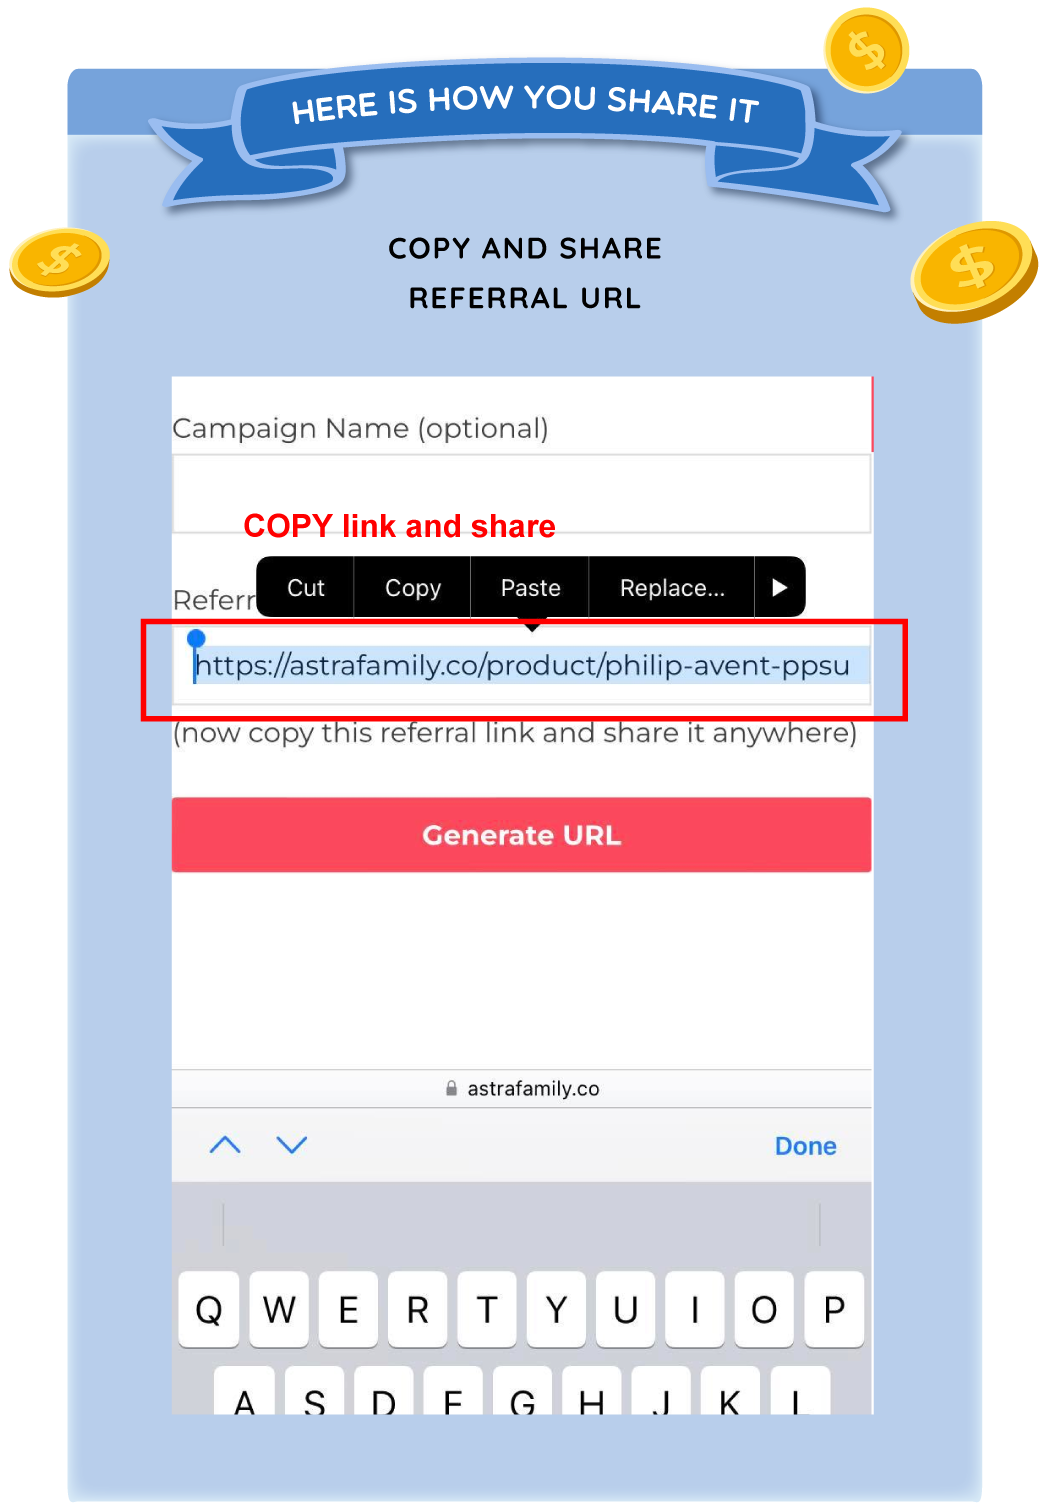 Astra Family A screenshot of the Share and Earn referral url.